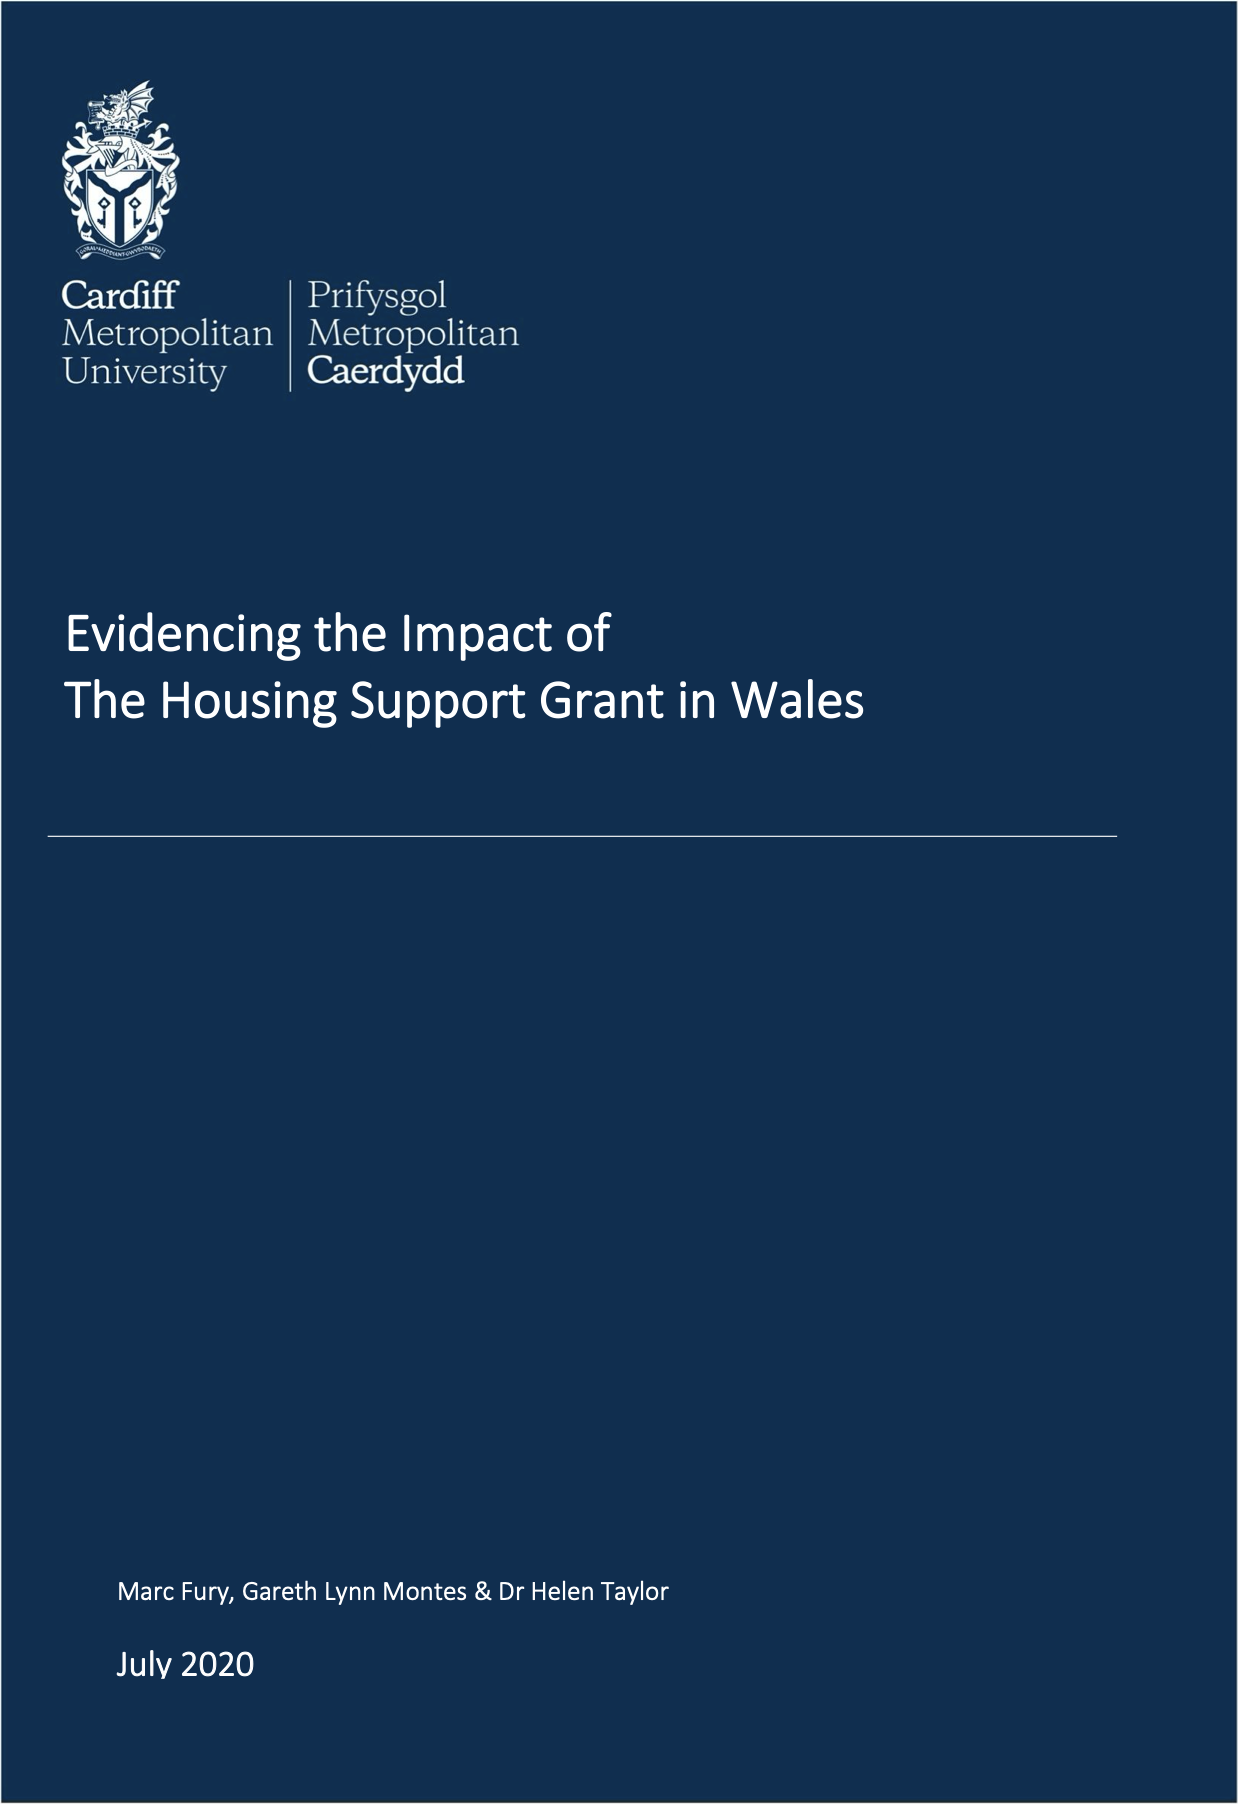 Cover-Evidencing the Impact of the Housing Support Grant in Wales.png